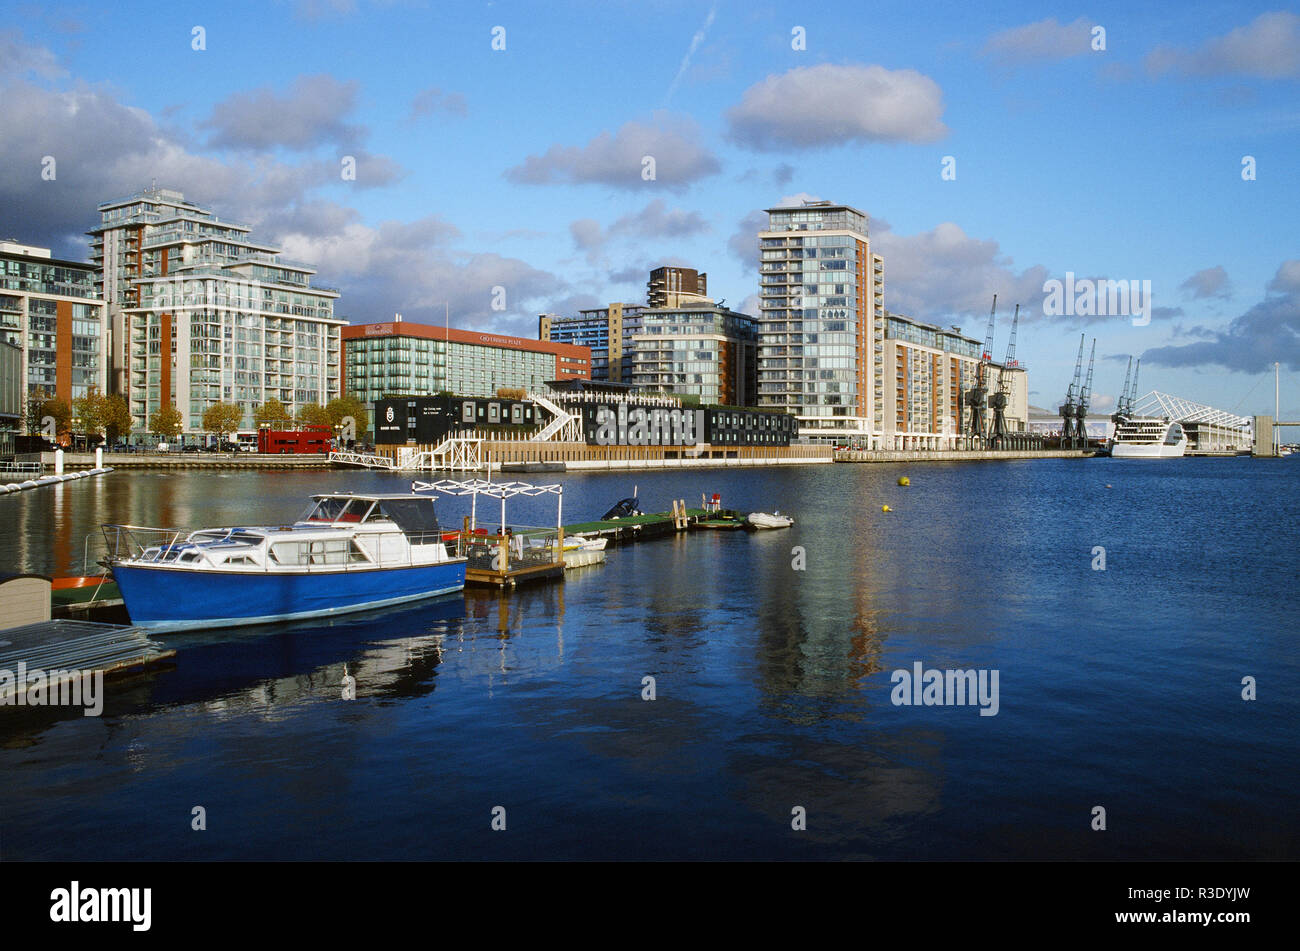 Royal Victoria Dock, Canning Town, East London UK Stock Photo